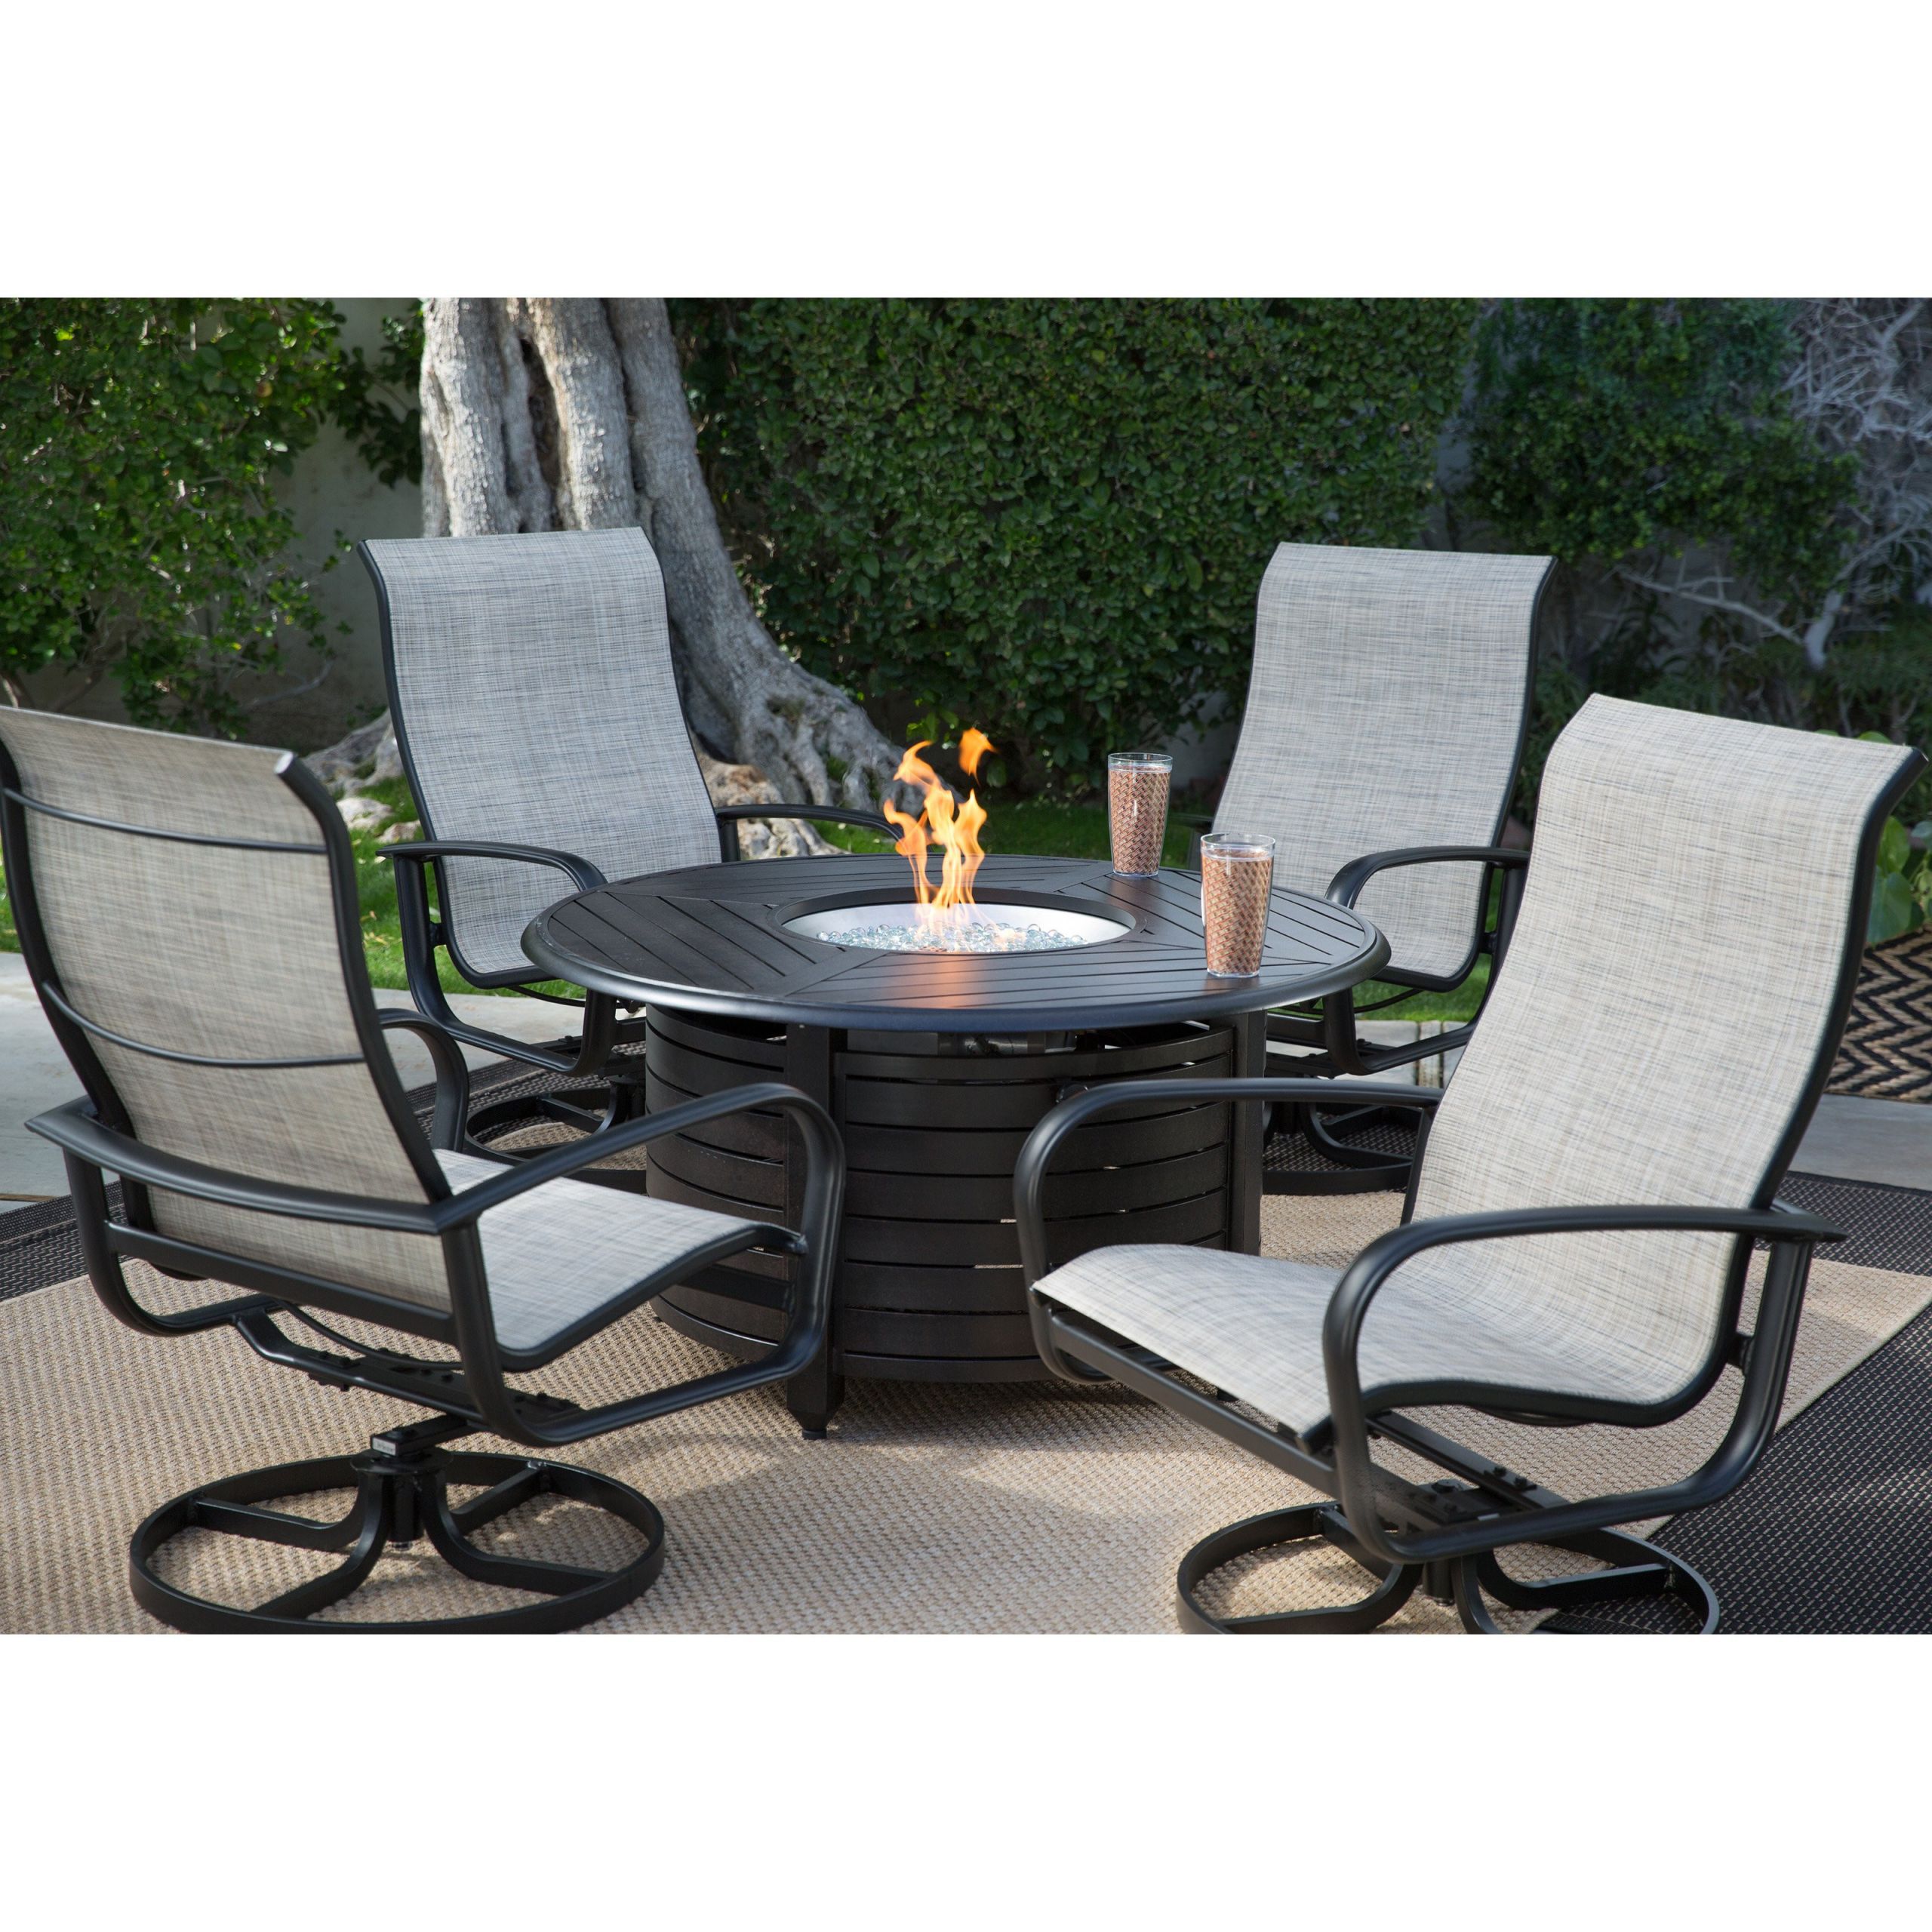 Firepit Patio Sets
 Fire Pit Patio Set Piece Sets With Modern Outdoor Ideas